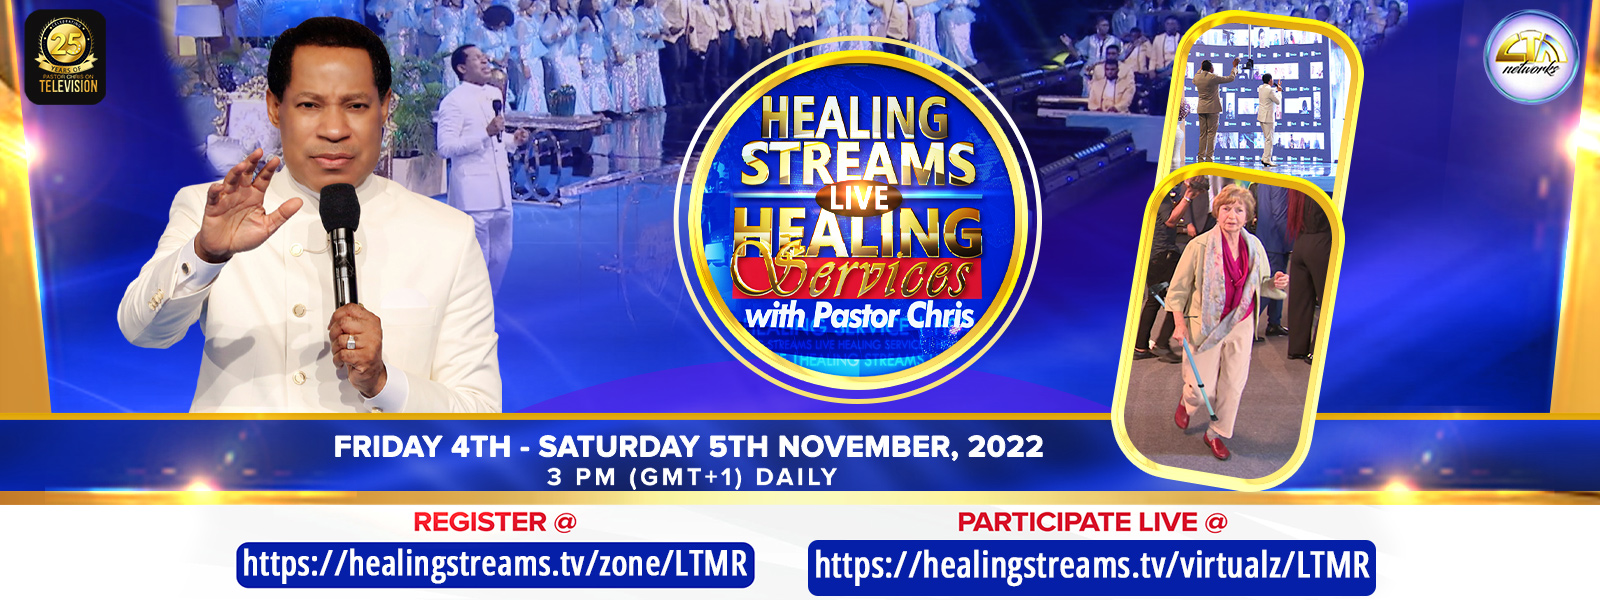 HEALING STREAMS LIVE HEALING SERVICES WITH PASTOR CHRIS NOVEMBER EDITION 